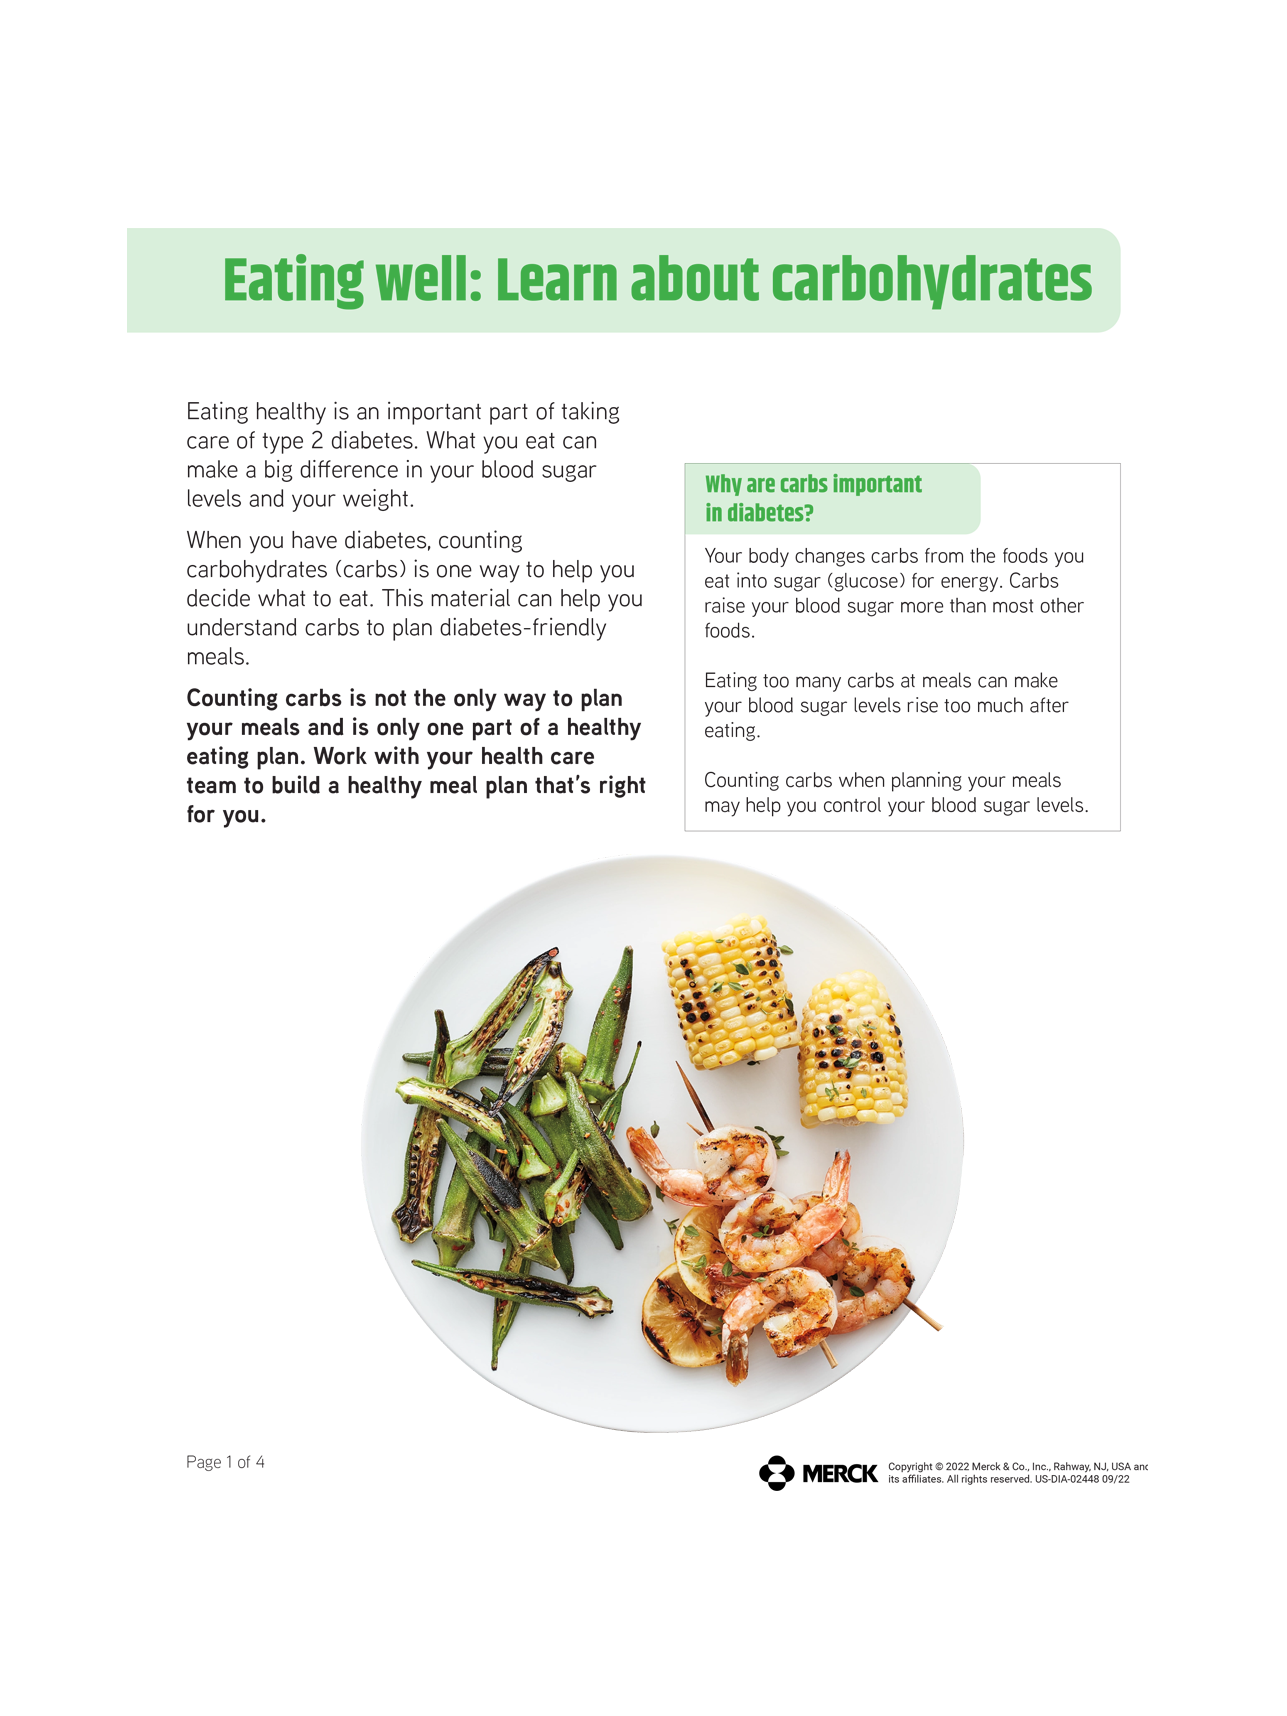 Information on Carbohydrates for Patients With Type 2 Diabetes